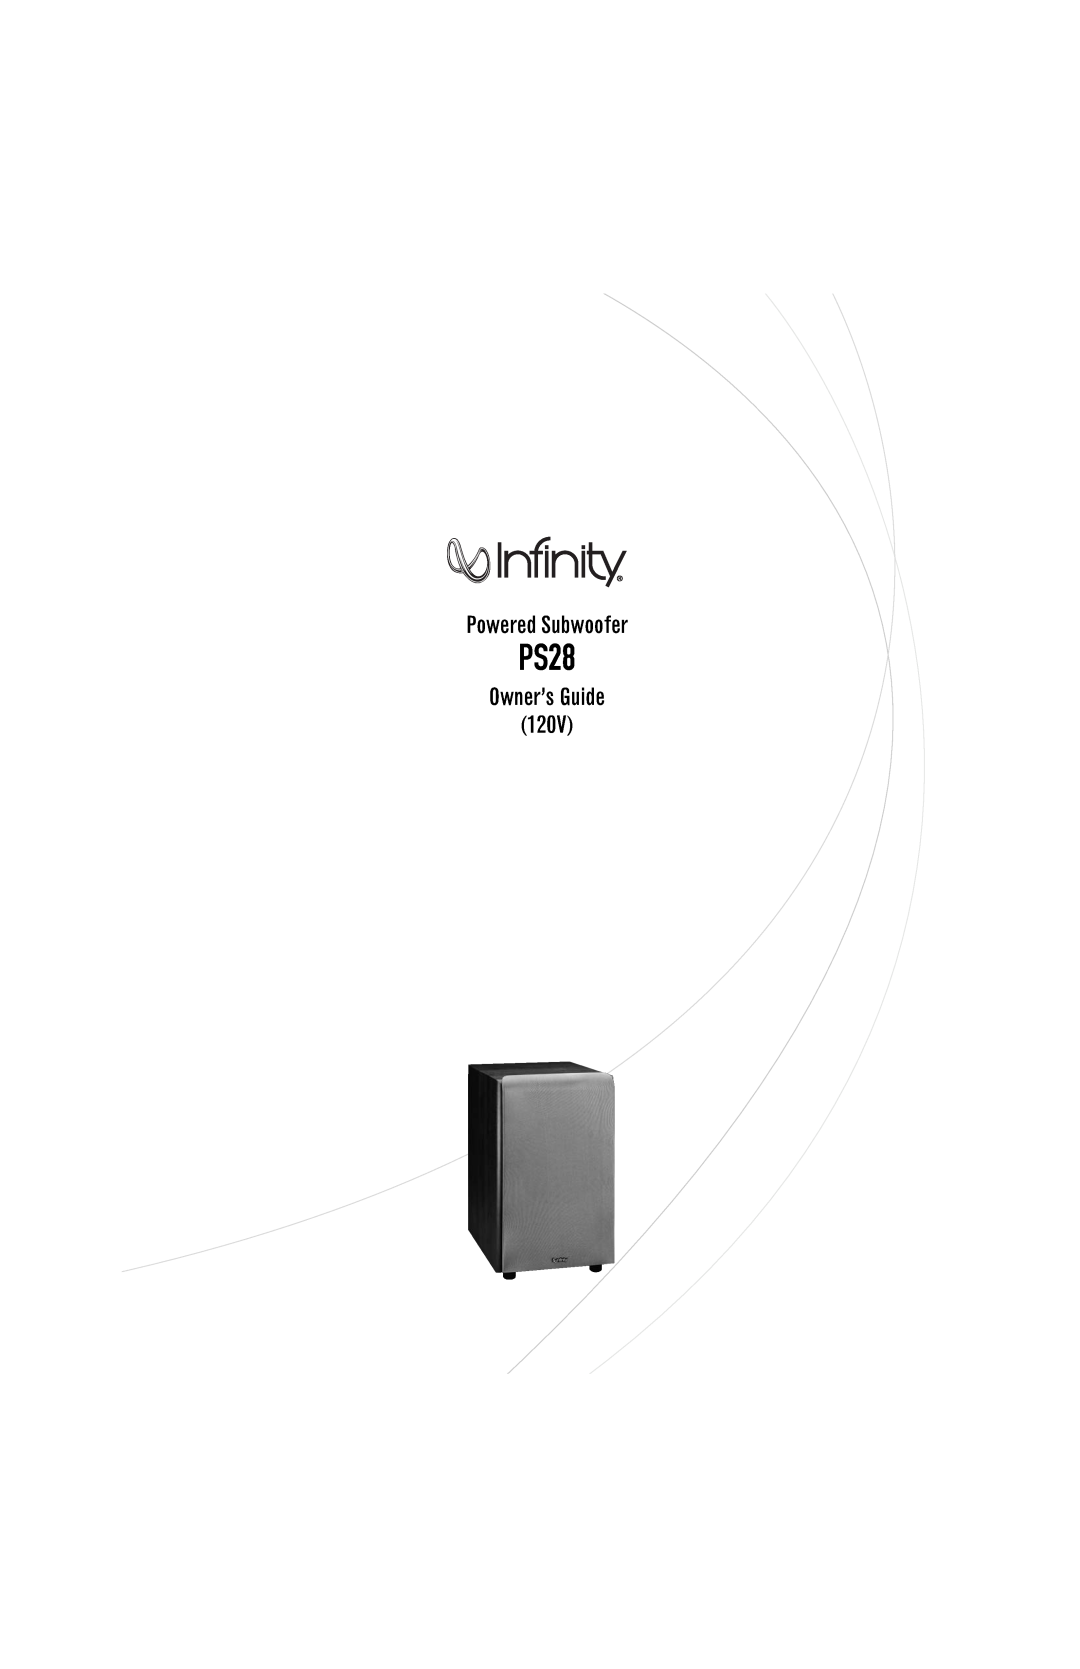 Infinity PS28 manual Powered Subwoofer, Owner’s Guide 